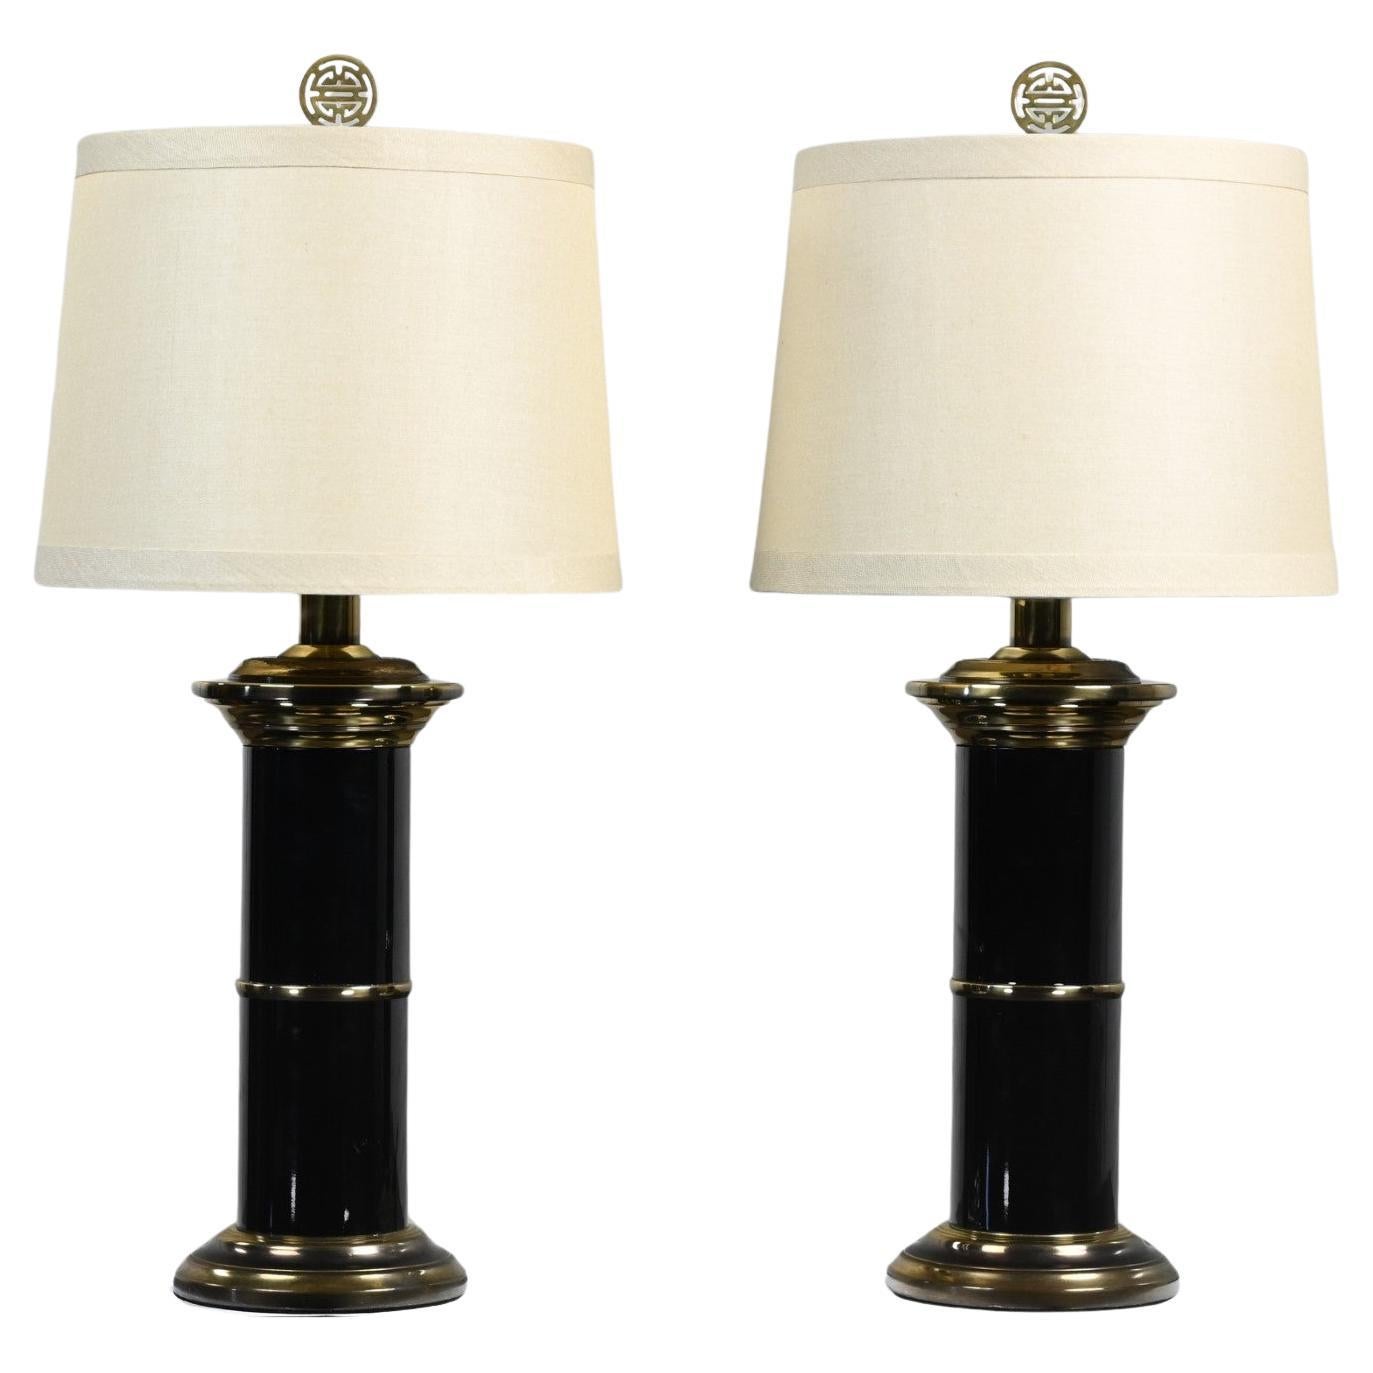 Hollywood Regency Black & Brass Plated Column Table Lamps Asian Finials a Pair For Sale